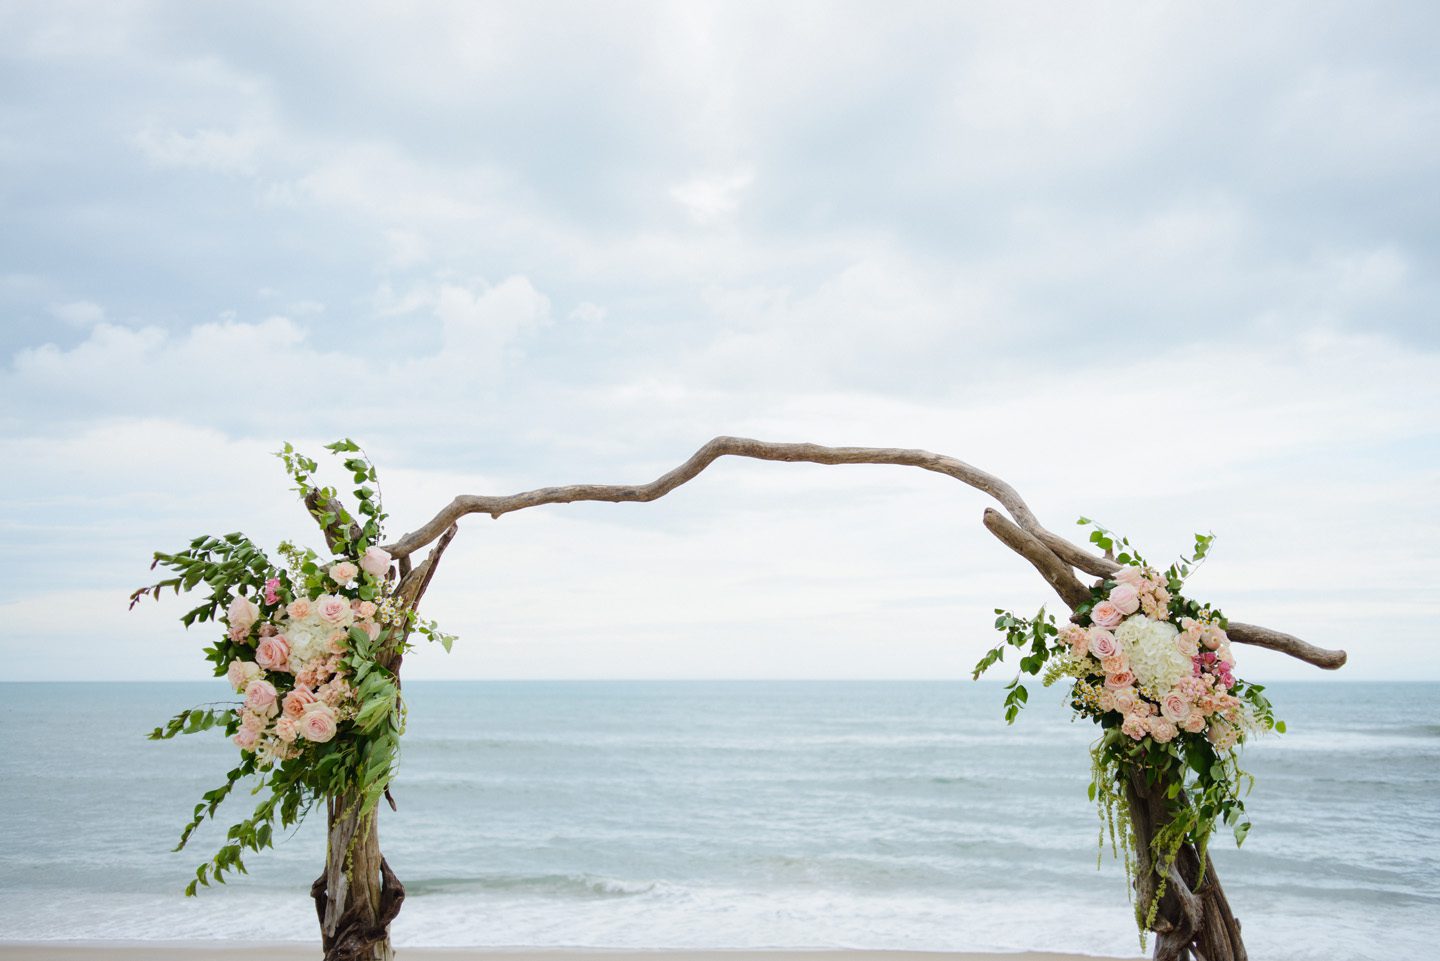 Outer Banks Wedding Photographers Neil GT Photography Palmers Island Beach Elopement Ceremony Decor